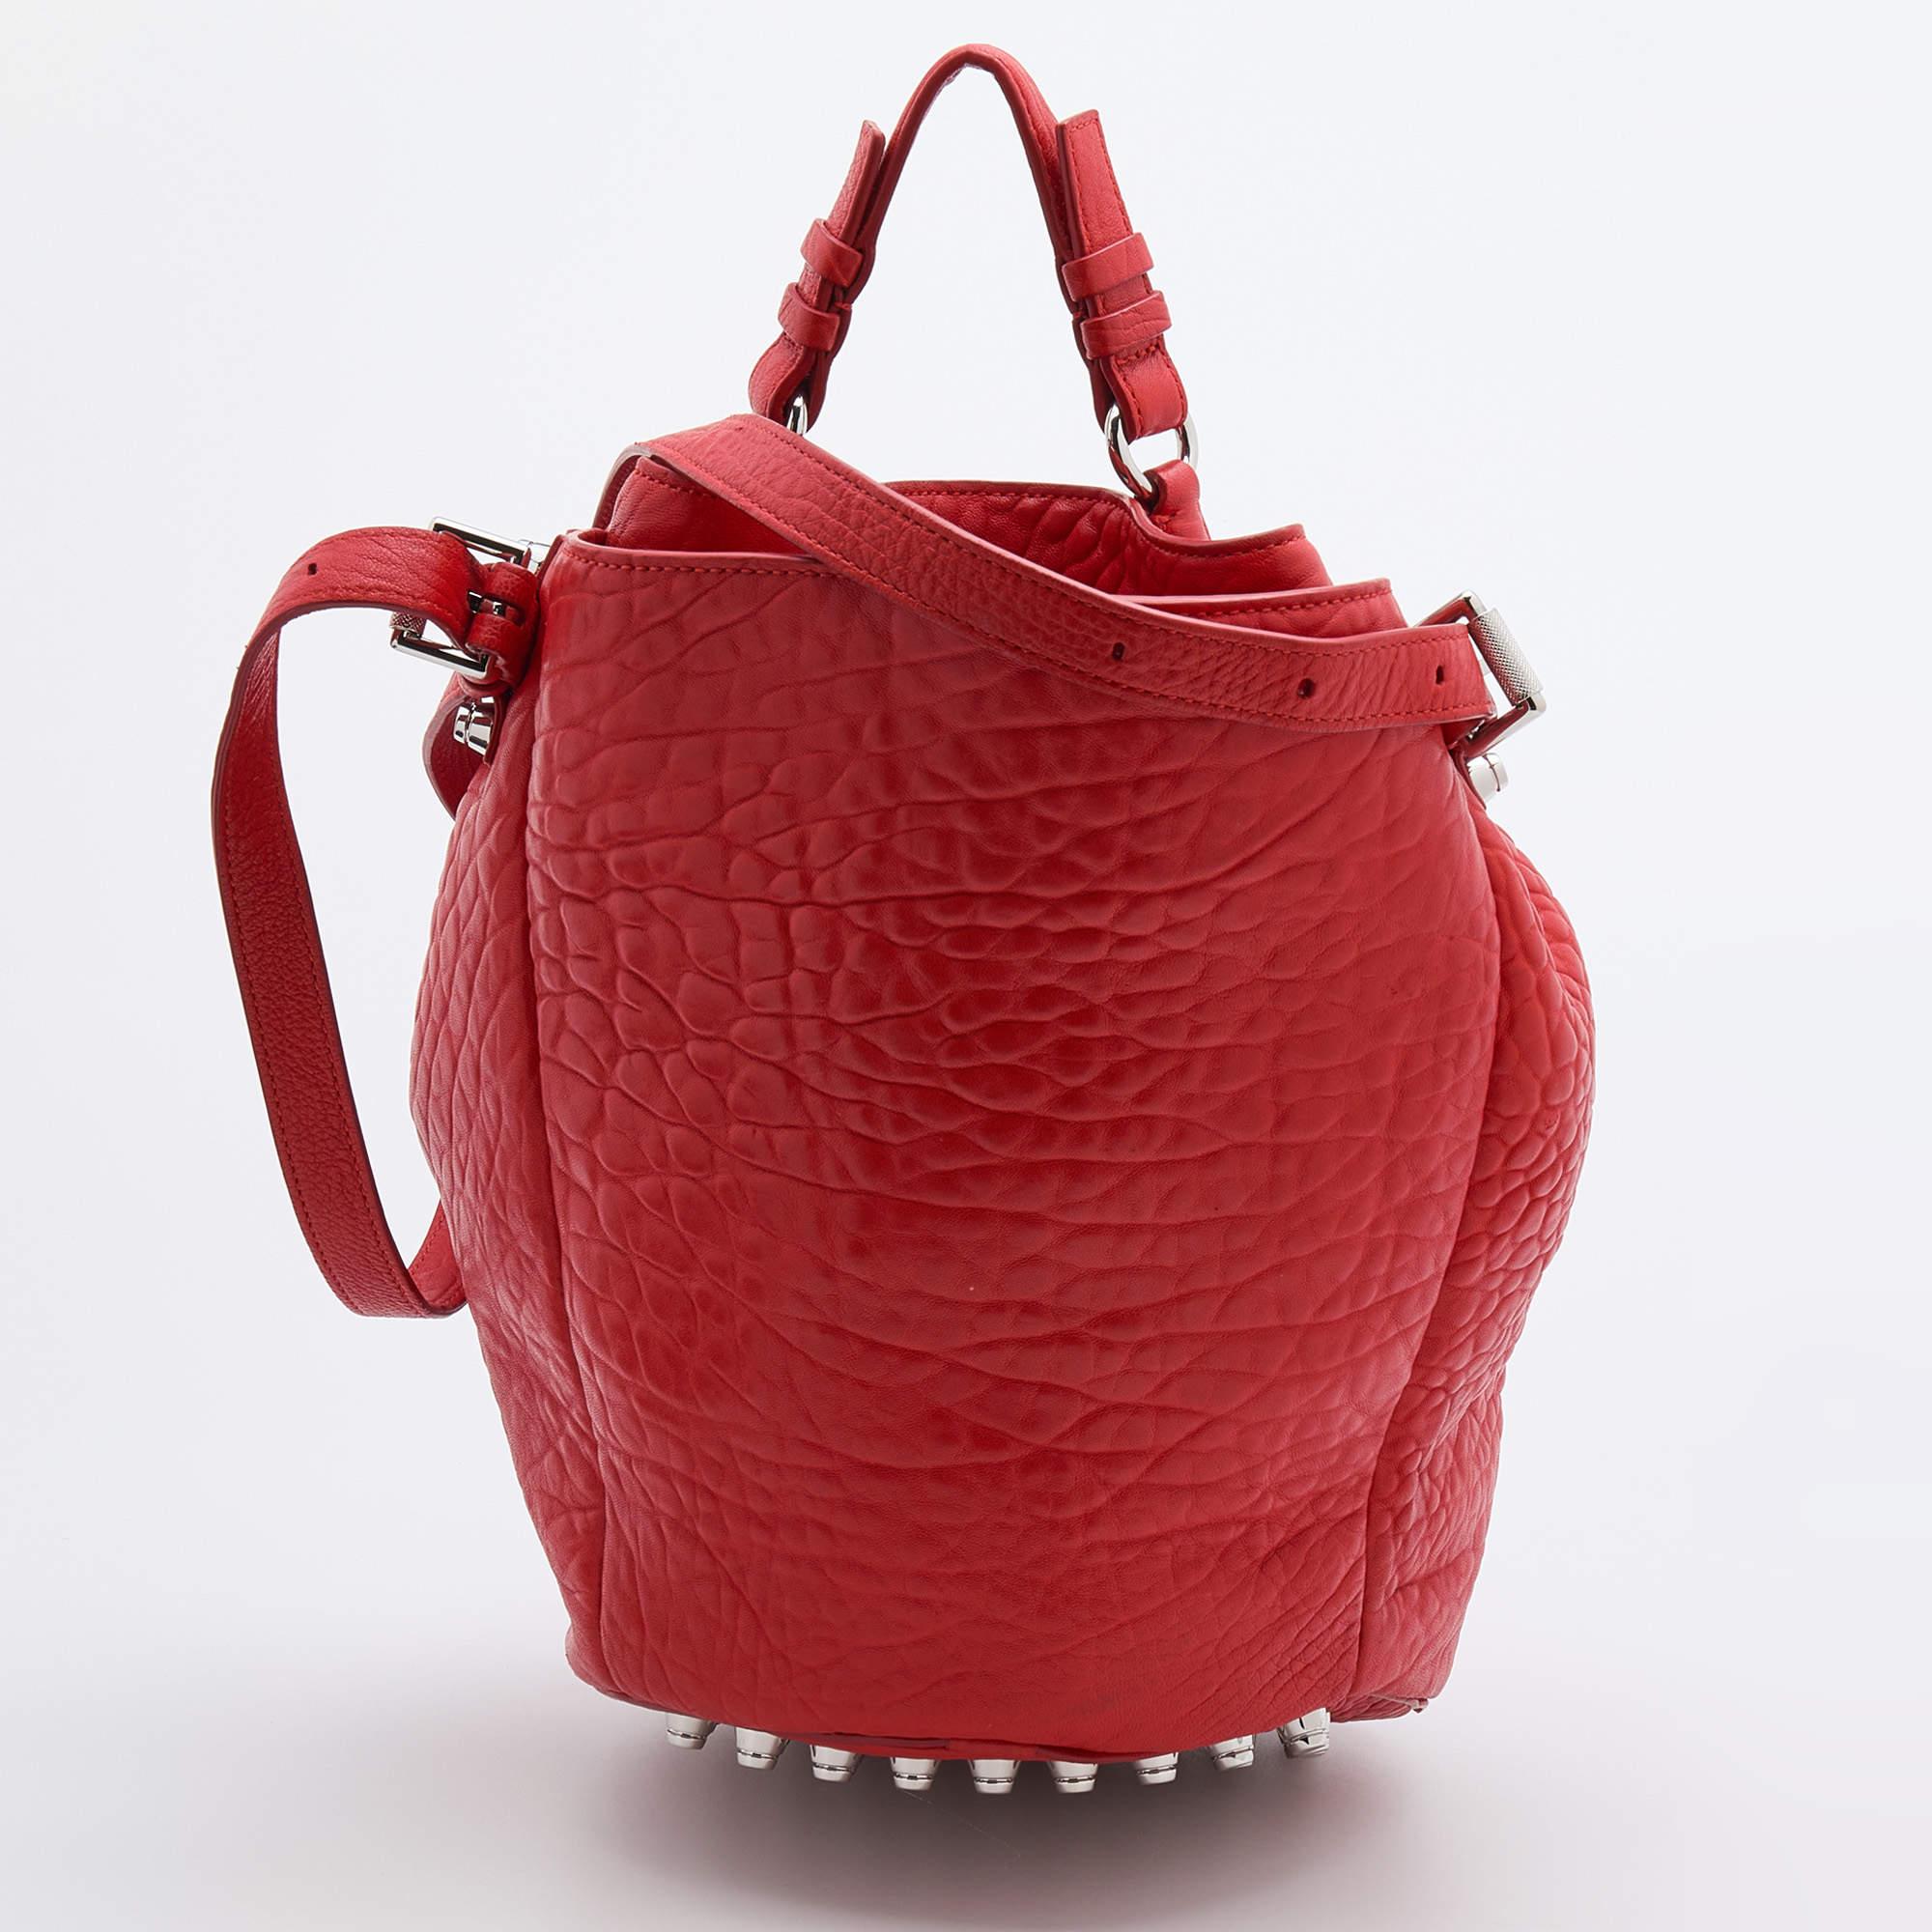 This chic Diego bucket bag from Alexander Wang offers ample style and functional ease. Crafted from textured leather, the bag features a single top handle, an adjustable shoulder strap, and silver-tone studs. The drawstring closure opens to a nylon